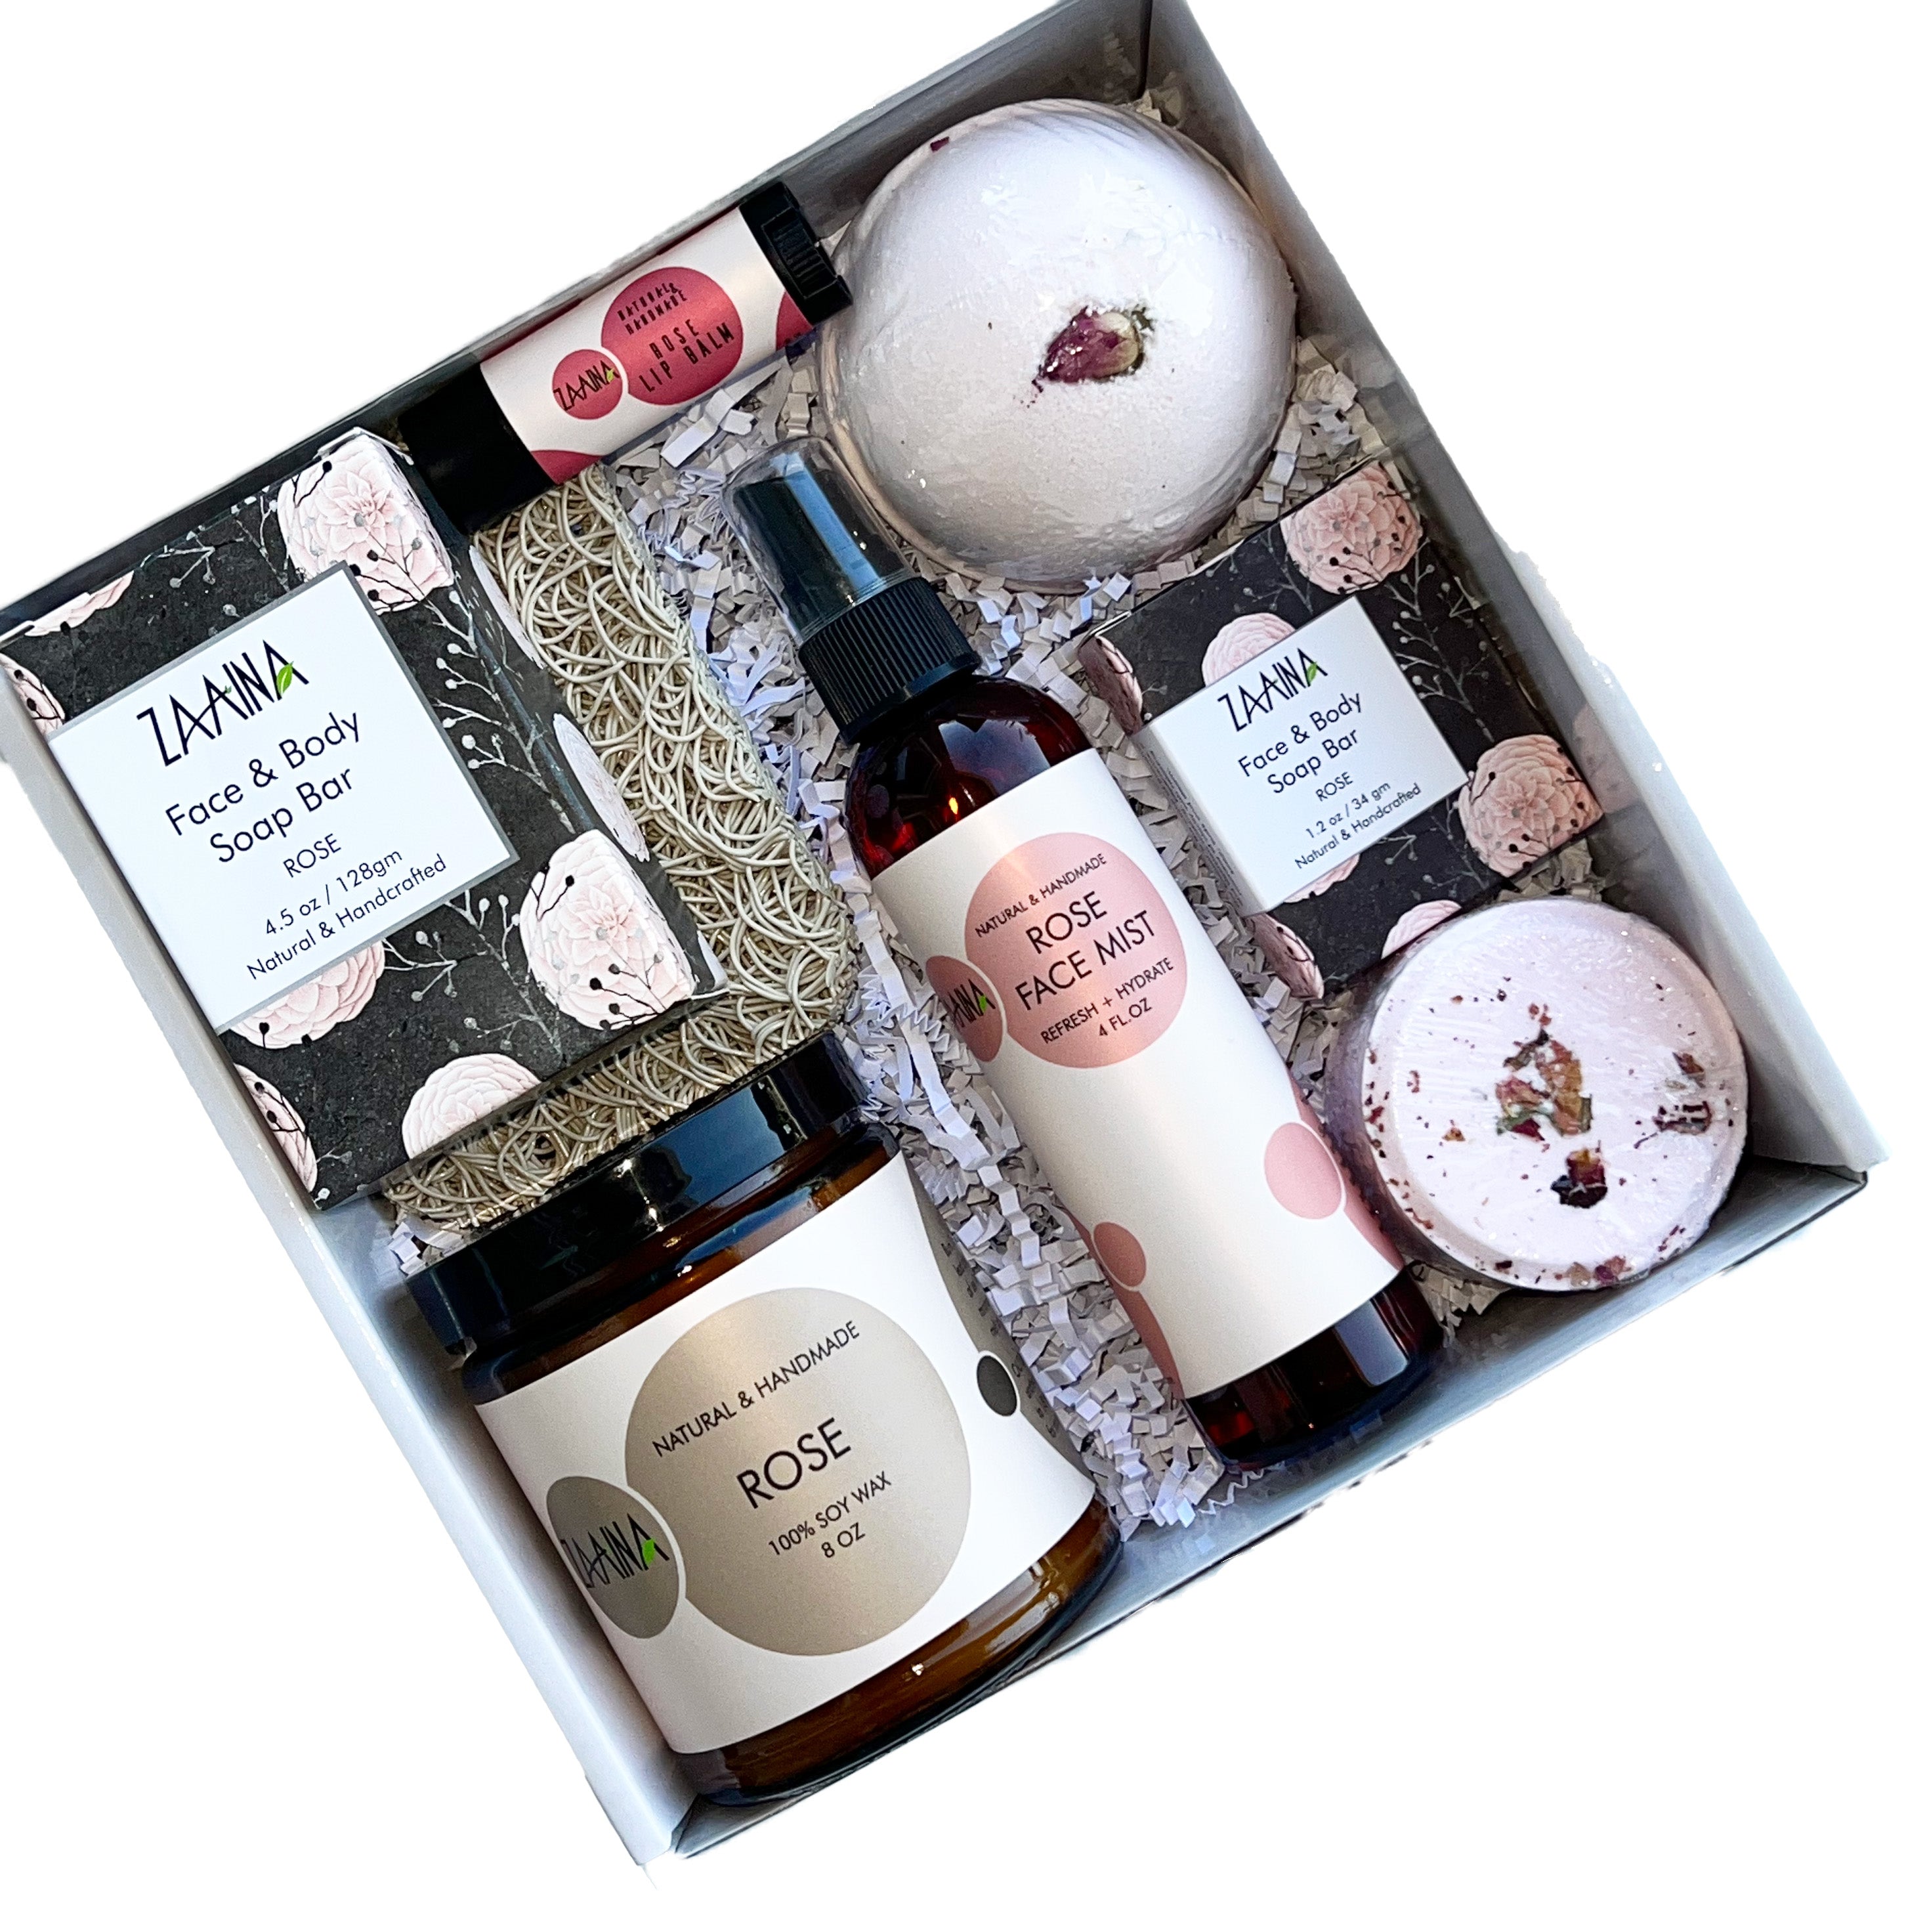 Spa Gift Set Ideas for Your Next Birthday, Wedding or Anniversary